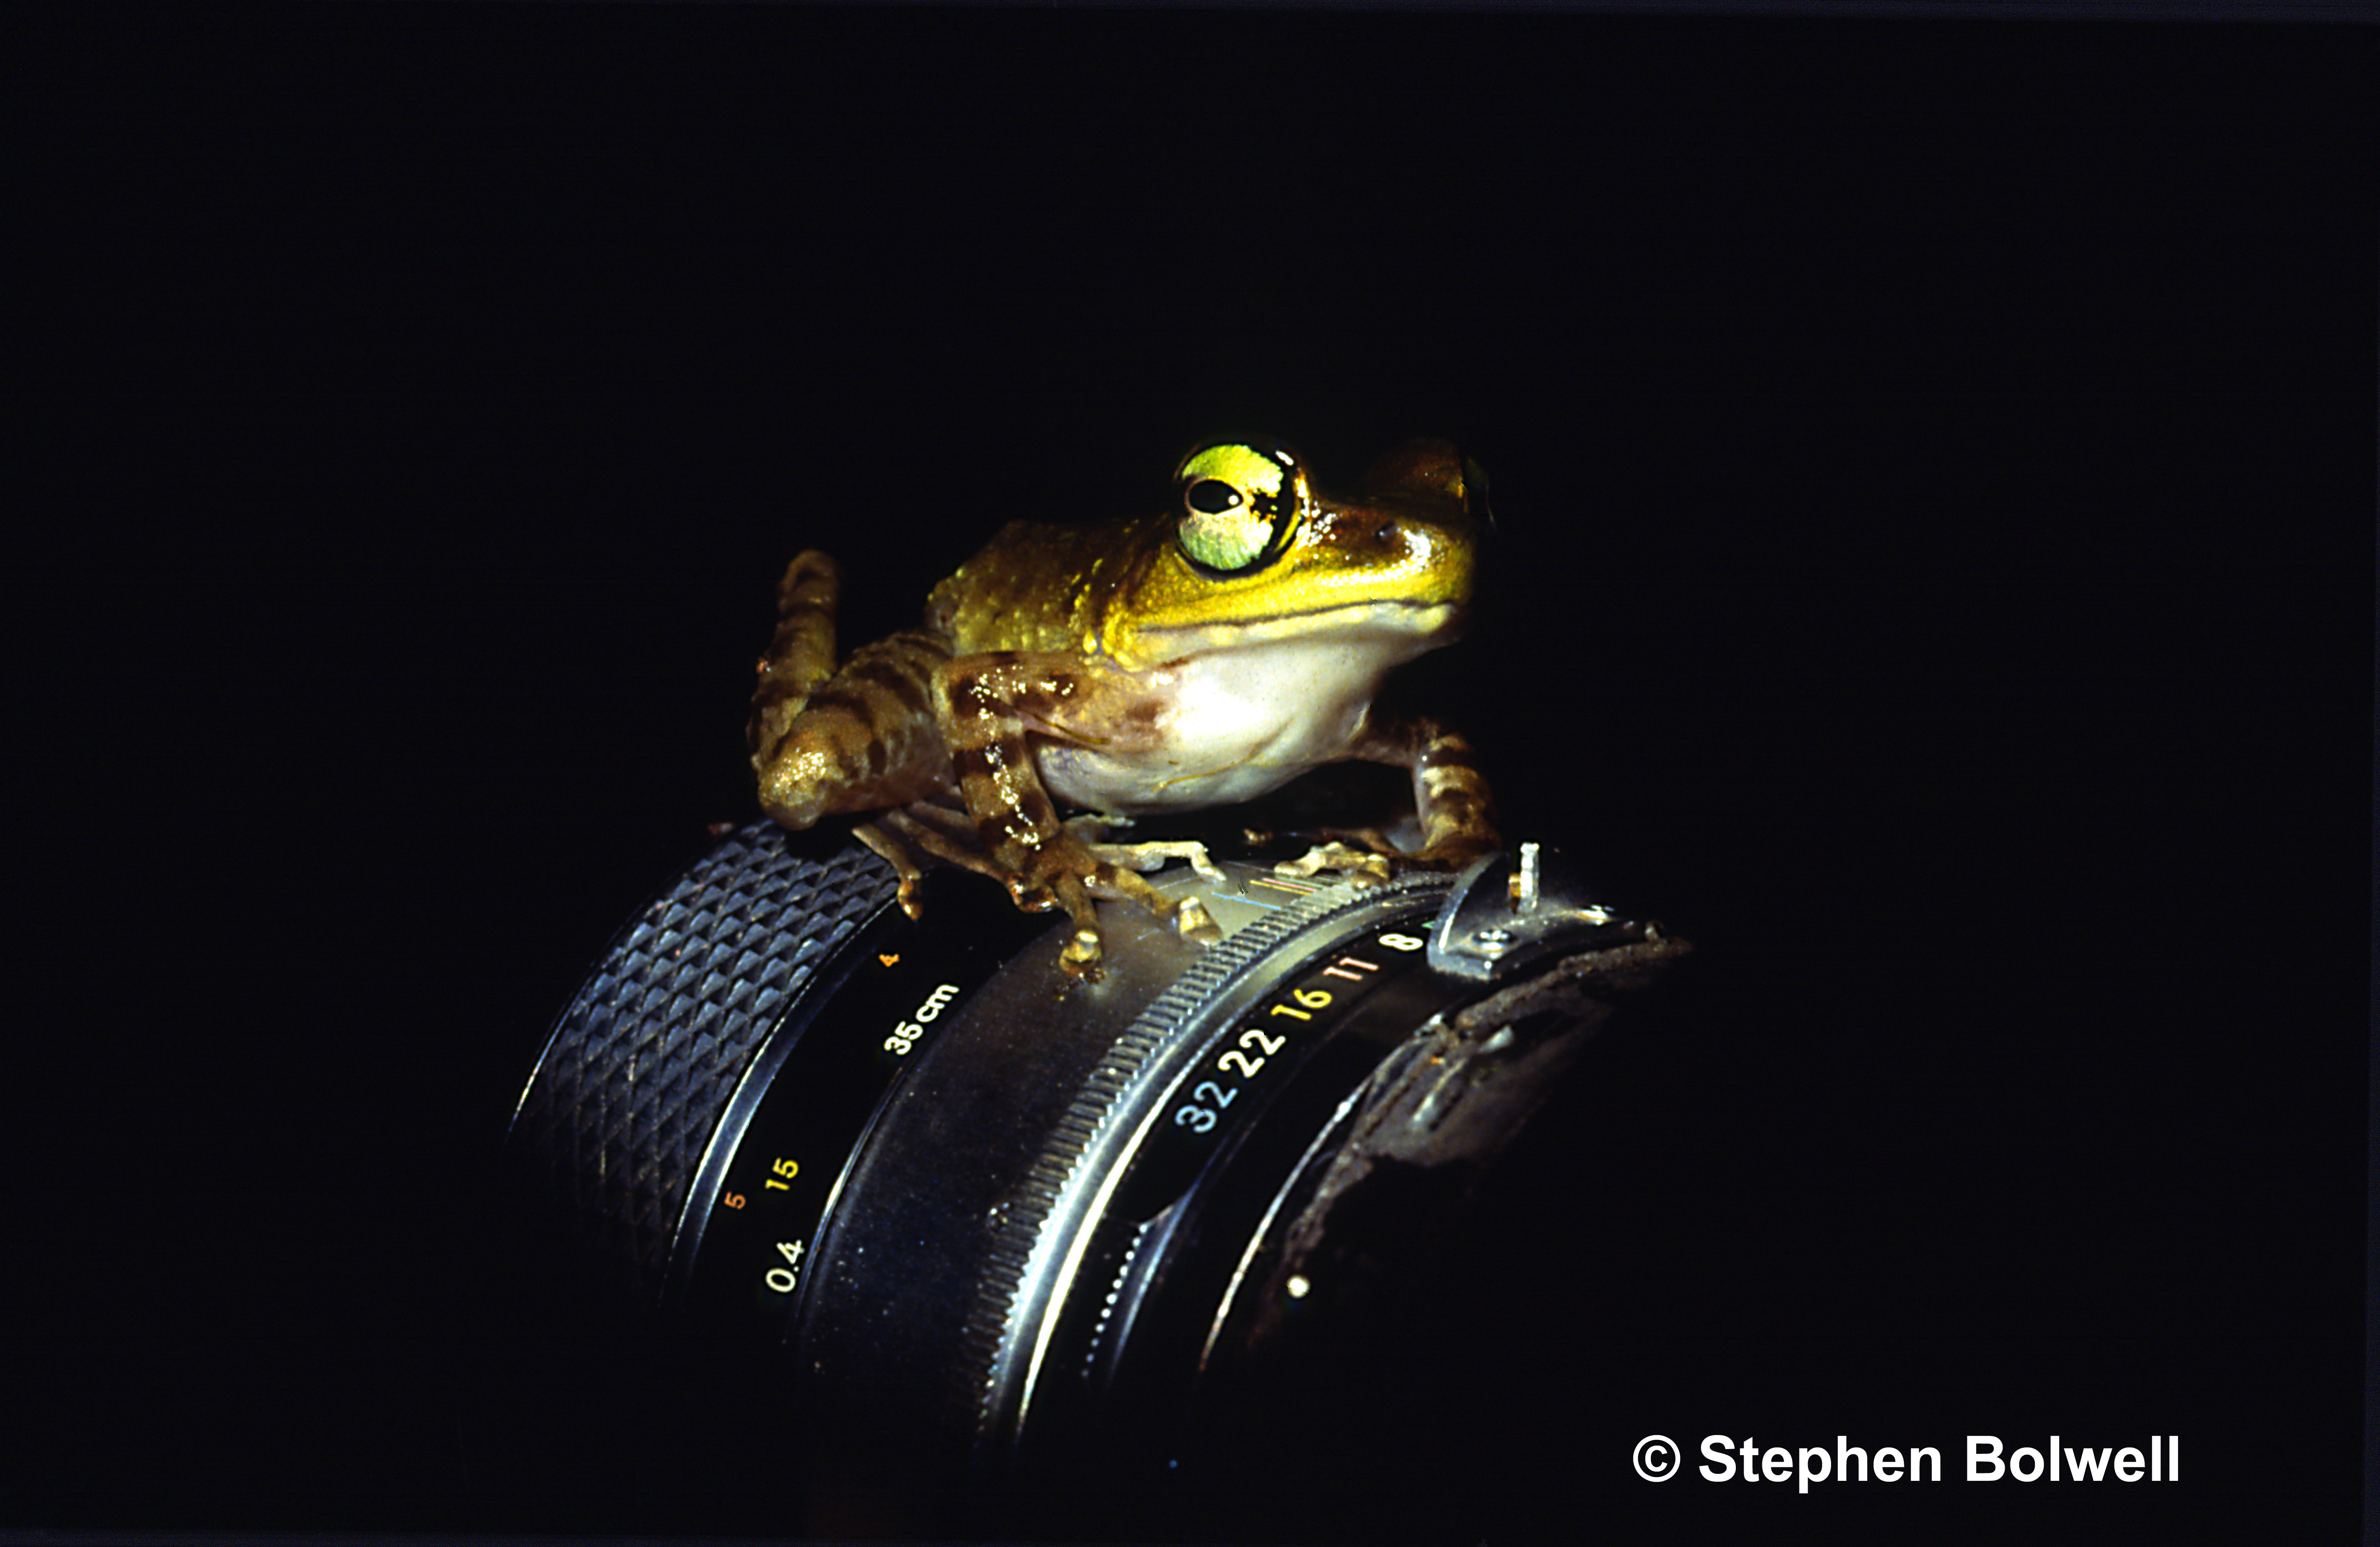 Frogs will often jump into your side of reality when they are being filmed.